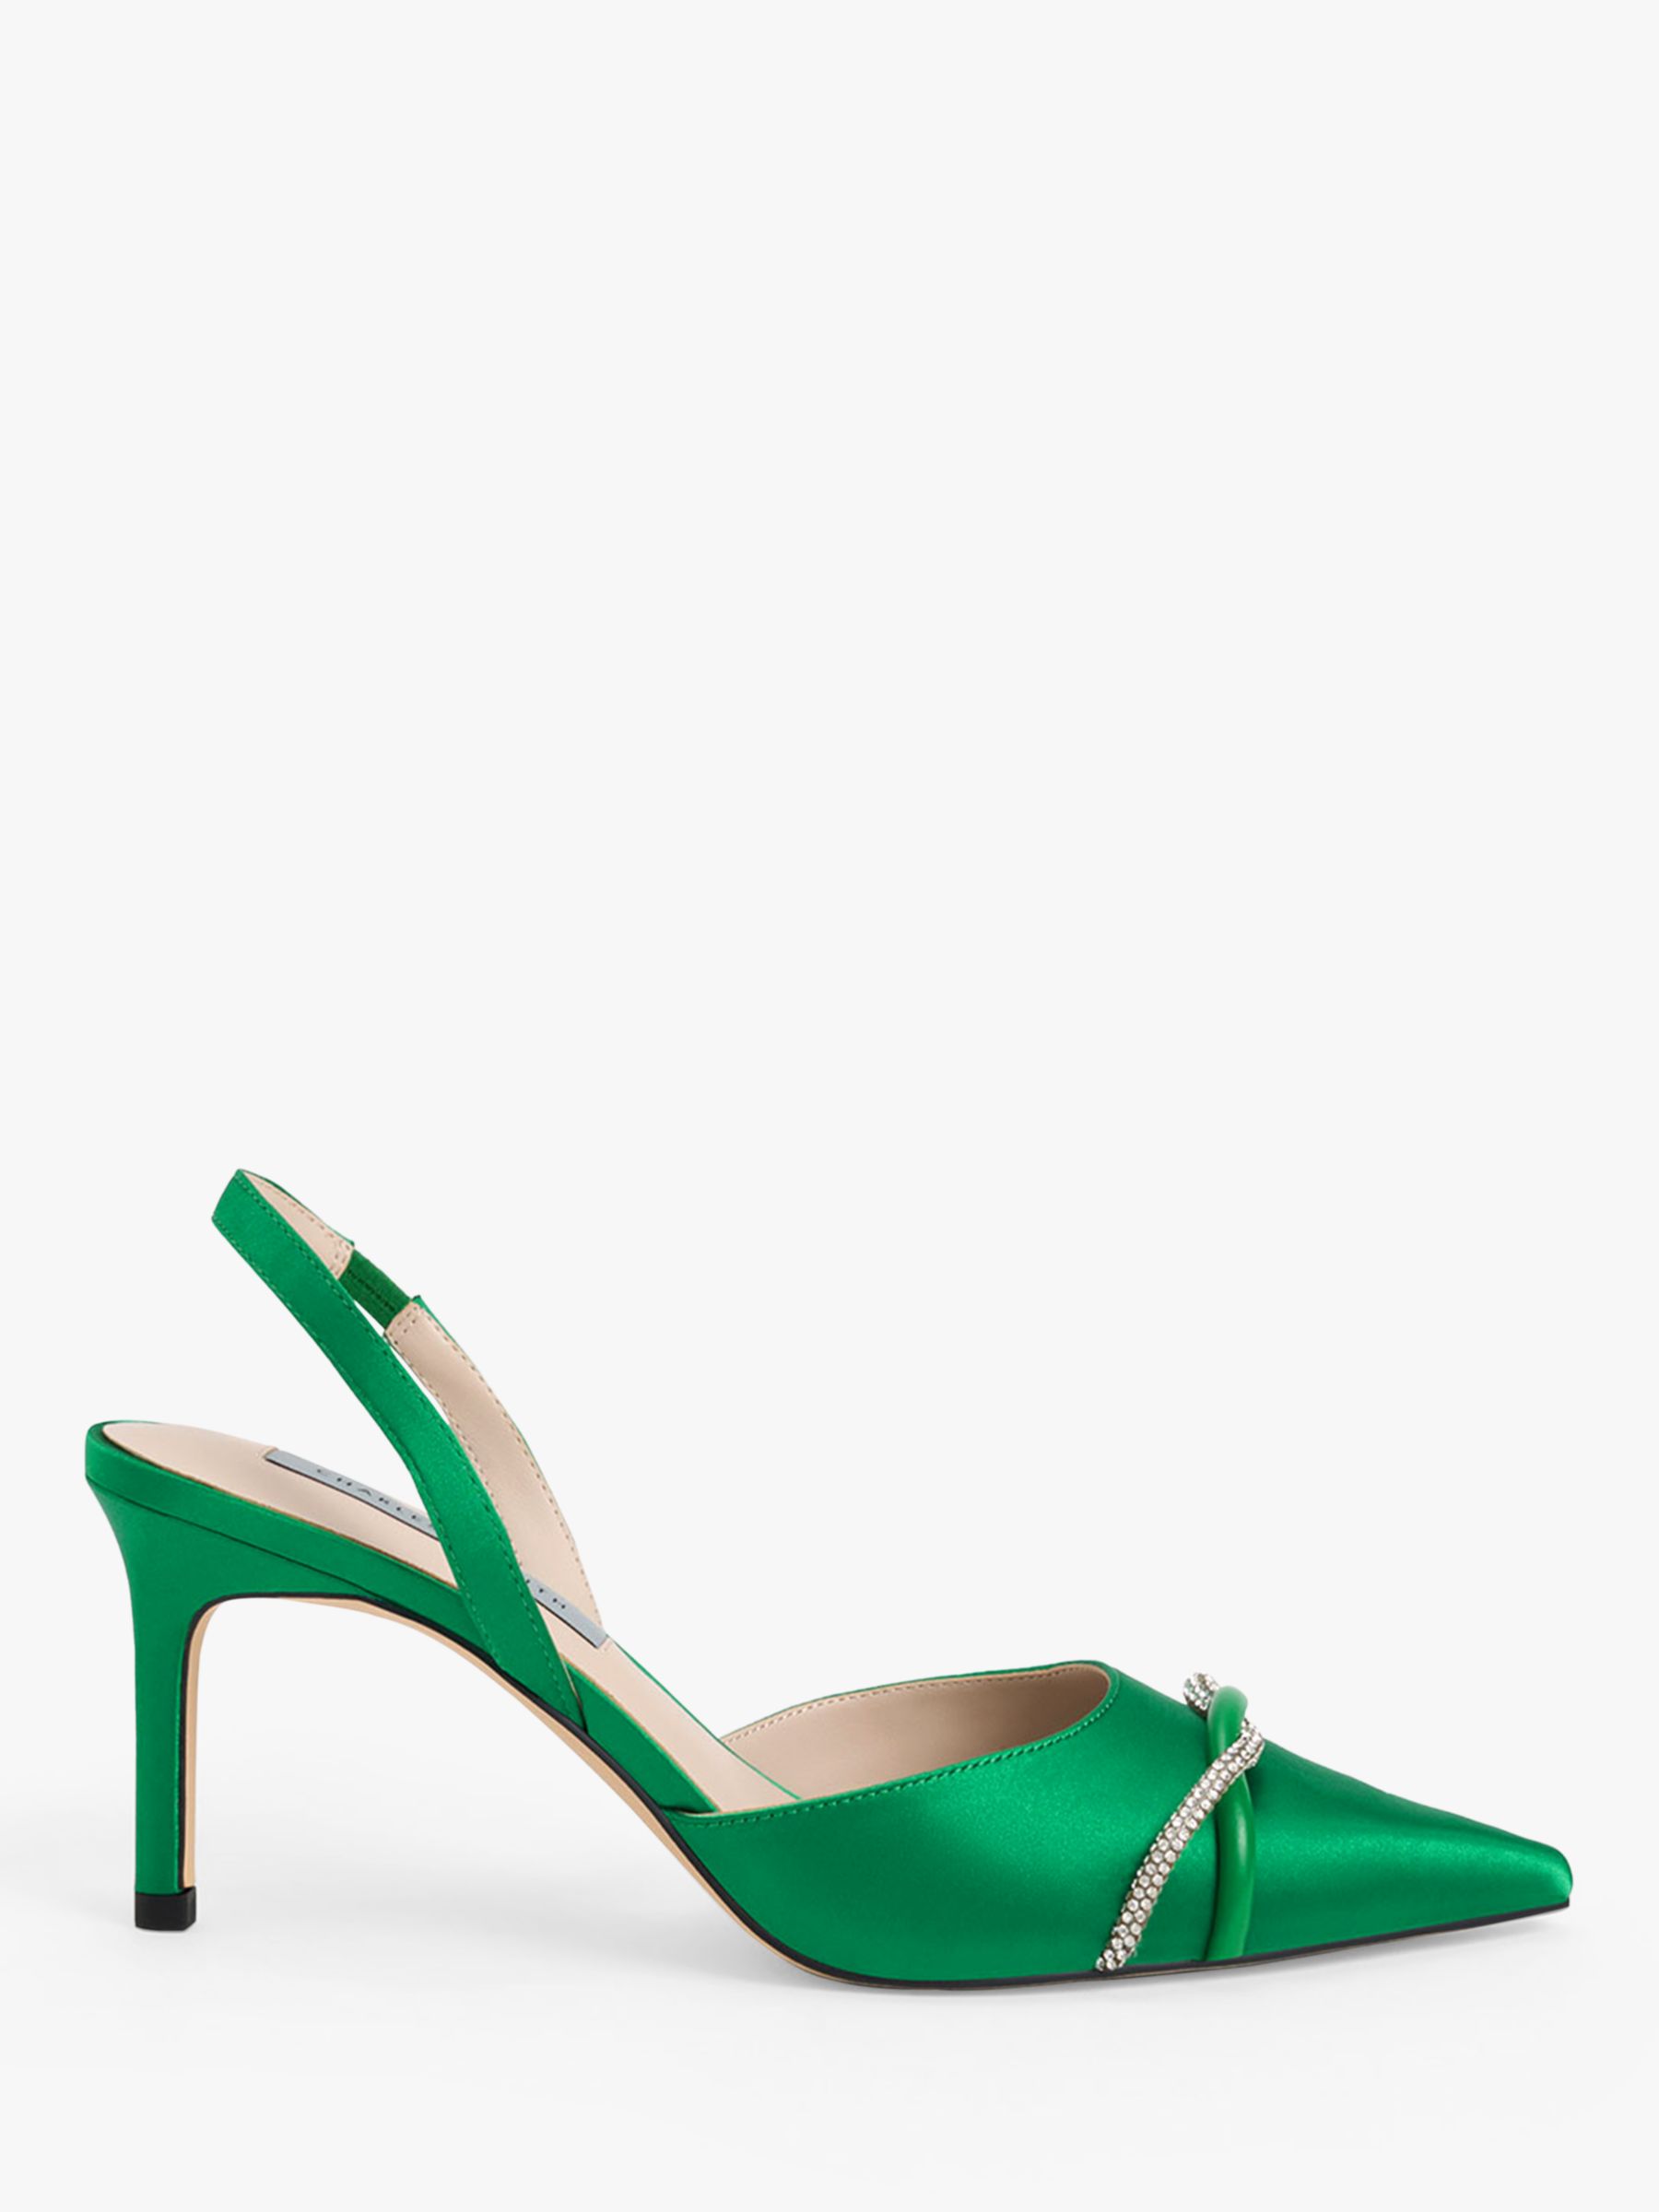 CHARLES & KEITH Satin Slingback Court Shoes, Green